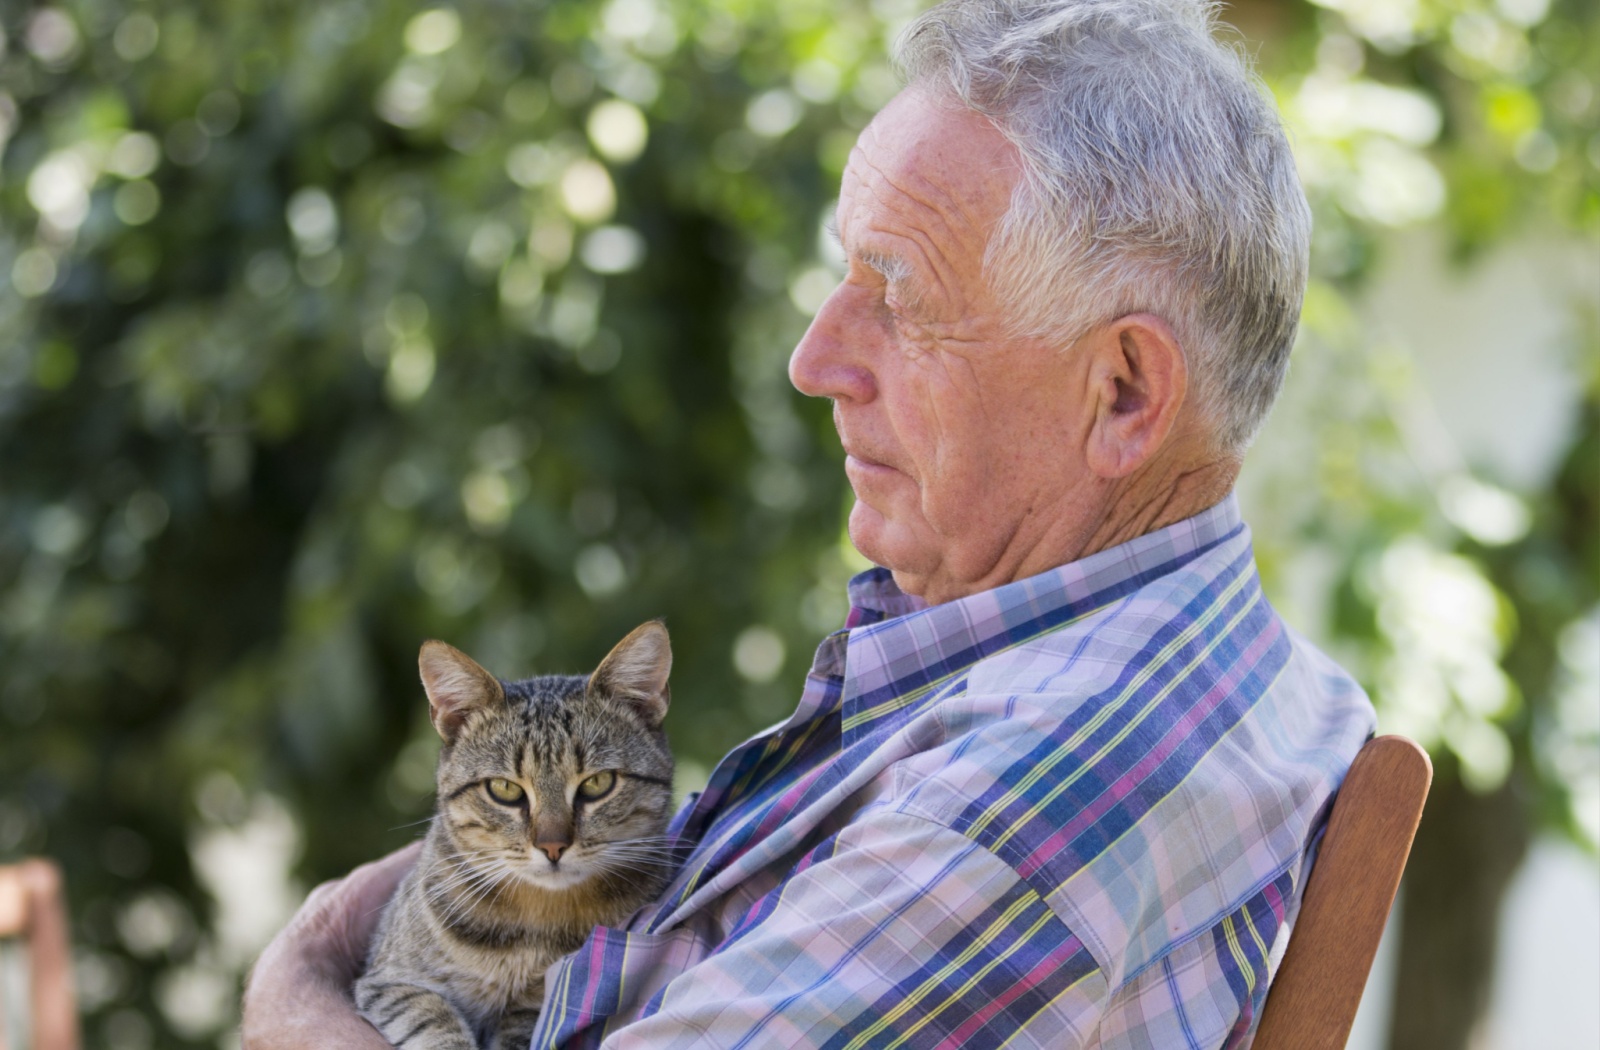 An older adult man lounging in his garden with his pet cat.
